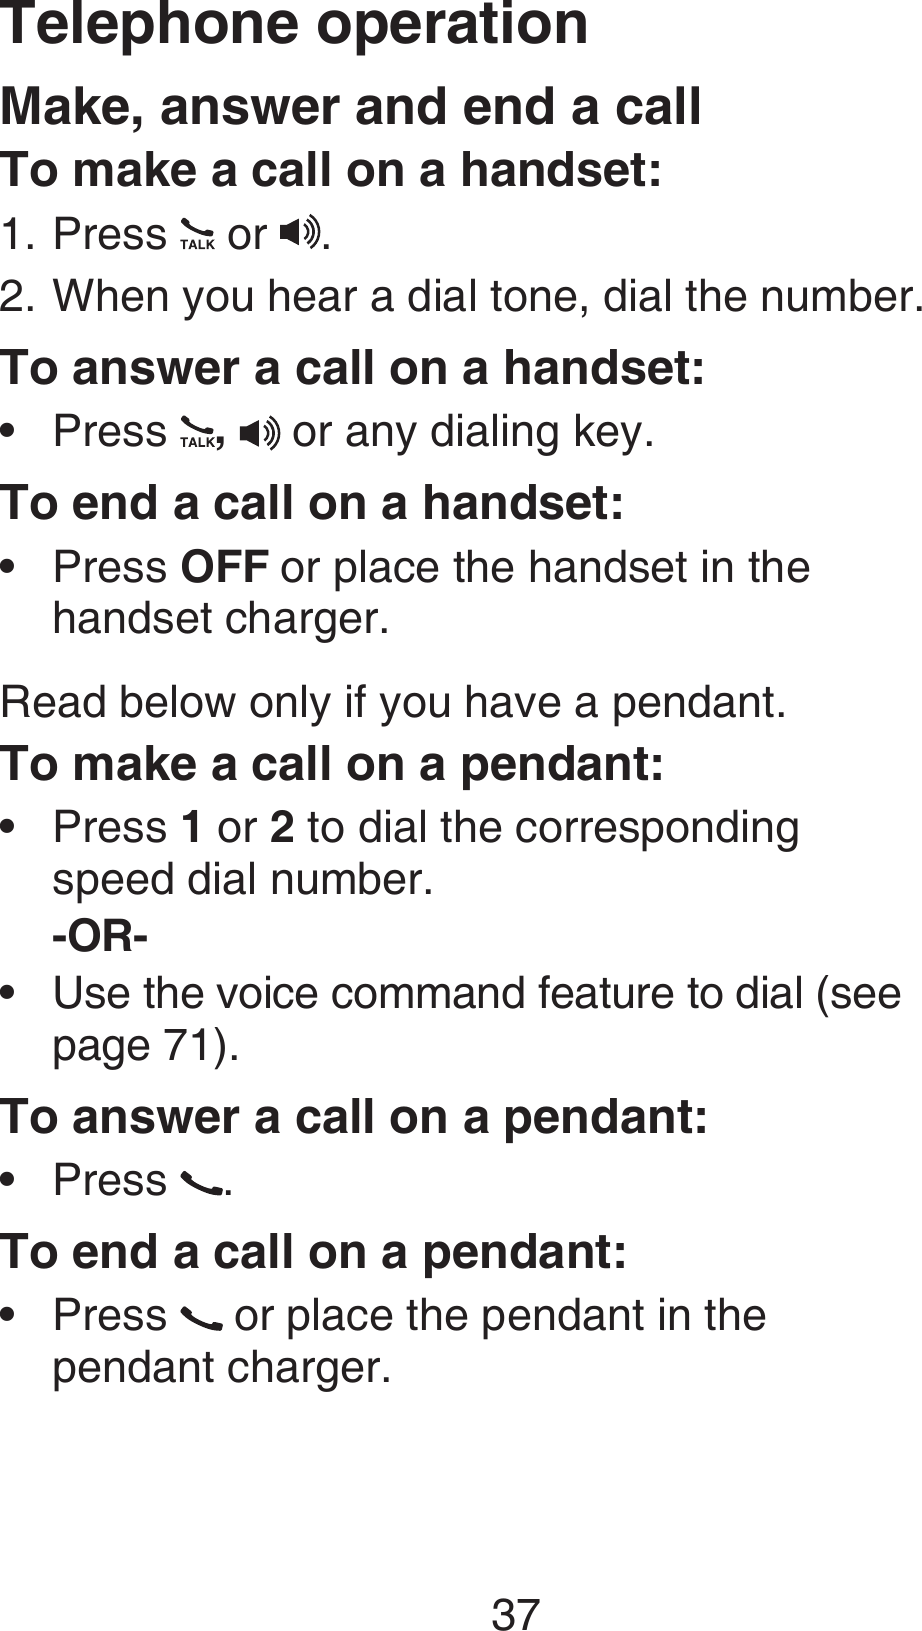 37Make, answer and end a callTo make a call on a handset:Press   or  . When you hear a dial tone, dial the number.To answer a call on a handset:Press  ,  or any dialing key.To end a call on a handset:Press OFF or place the handset in the  handset charger.Read below only if you have a pendant.To make a call on a pendant:Press 1 or 2 to dial the corresponding  speed dial number.-OR-Use the voice command feature to dial (see  page 71).To answer a call on a pendant:Press  .To end a call on a pendant:Press   or place the pendant in the  pendant charger.1.2.••••••Telephone operation